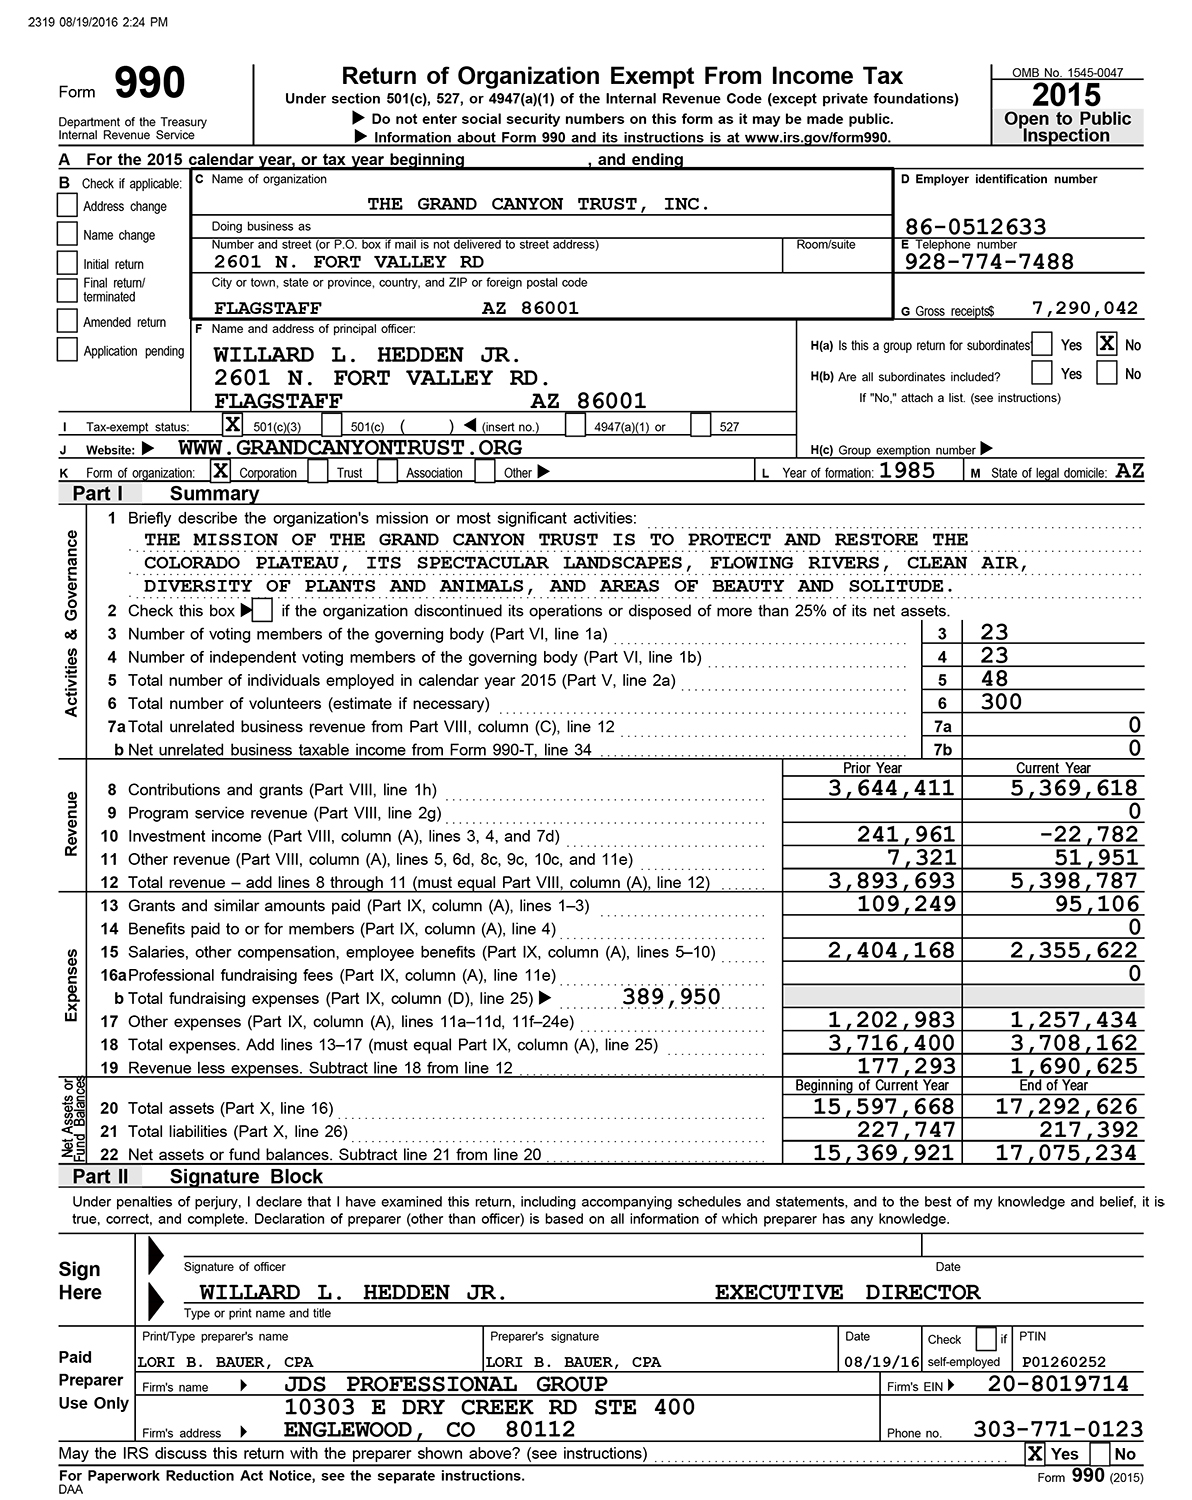 Download the 2015 Form 990